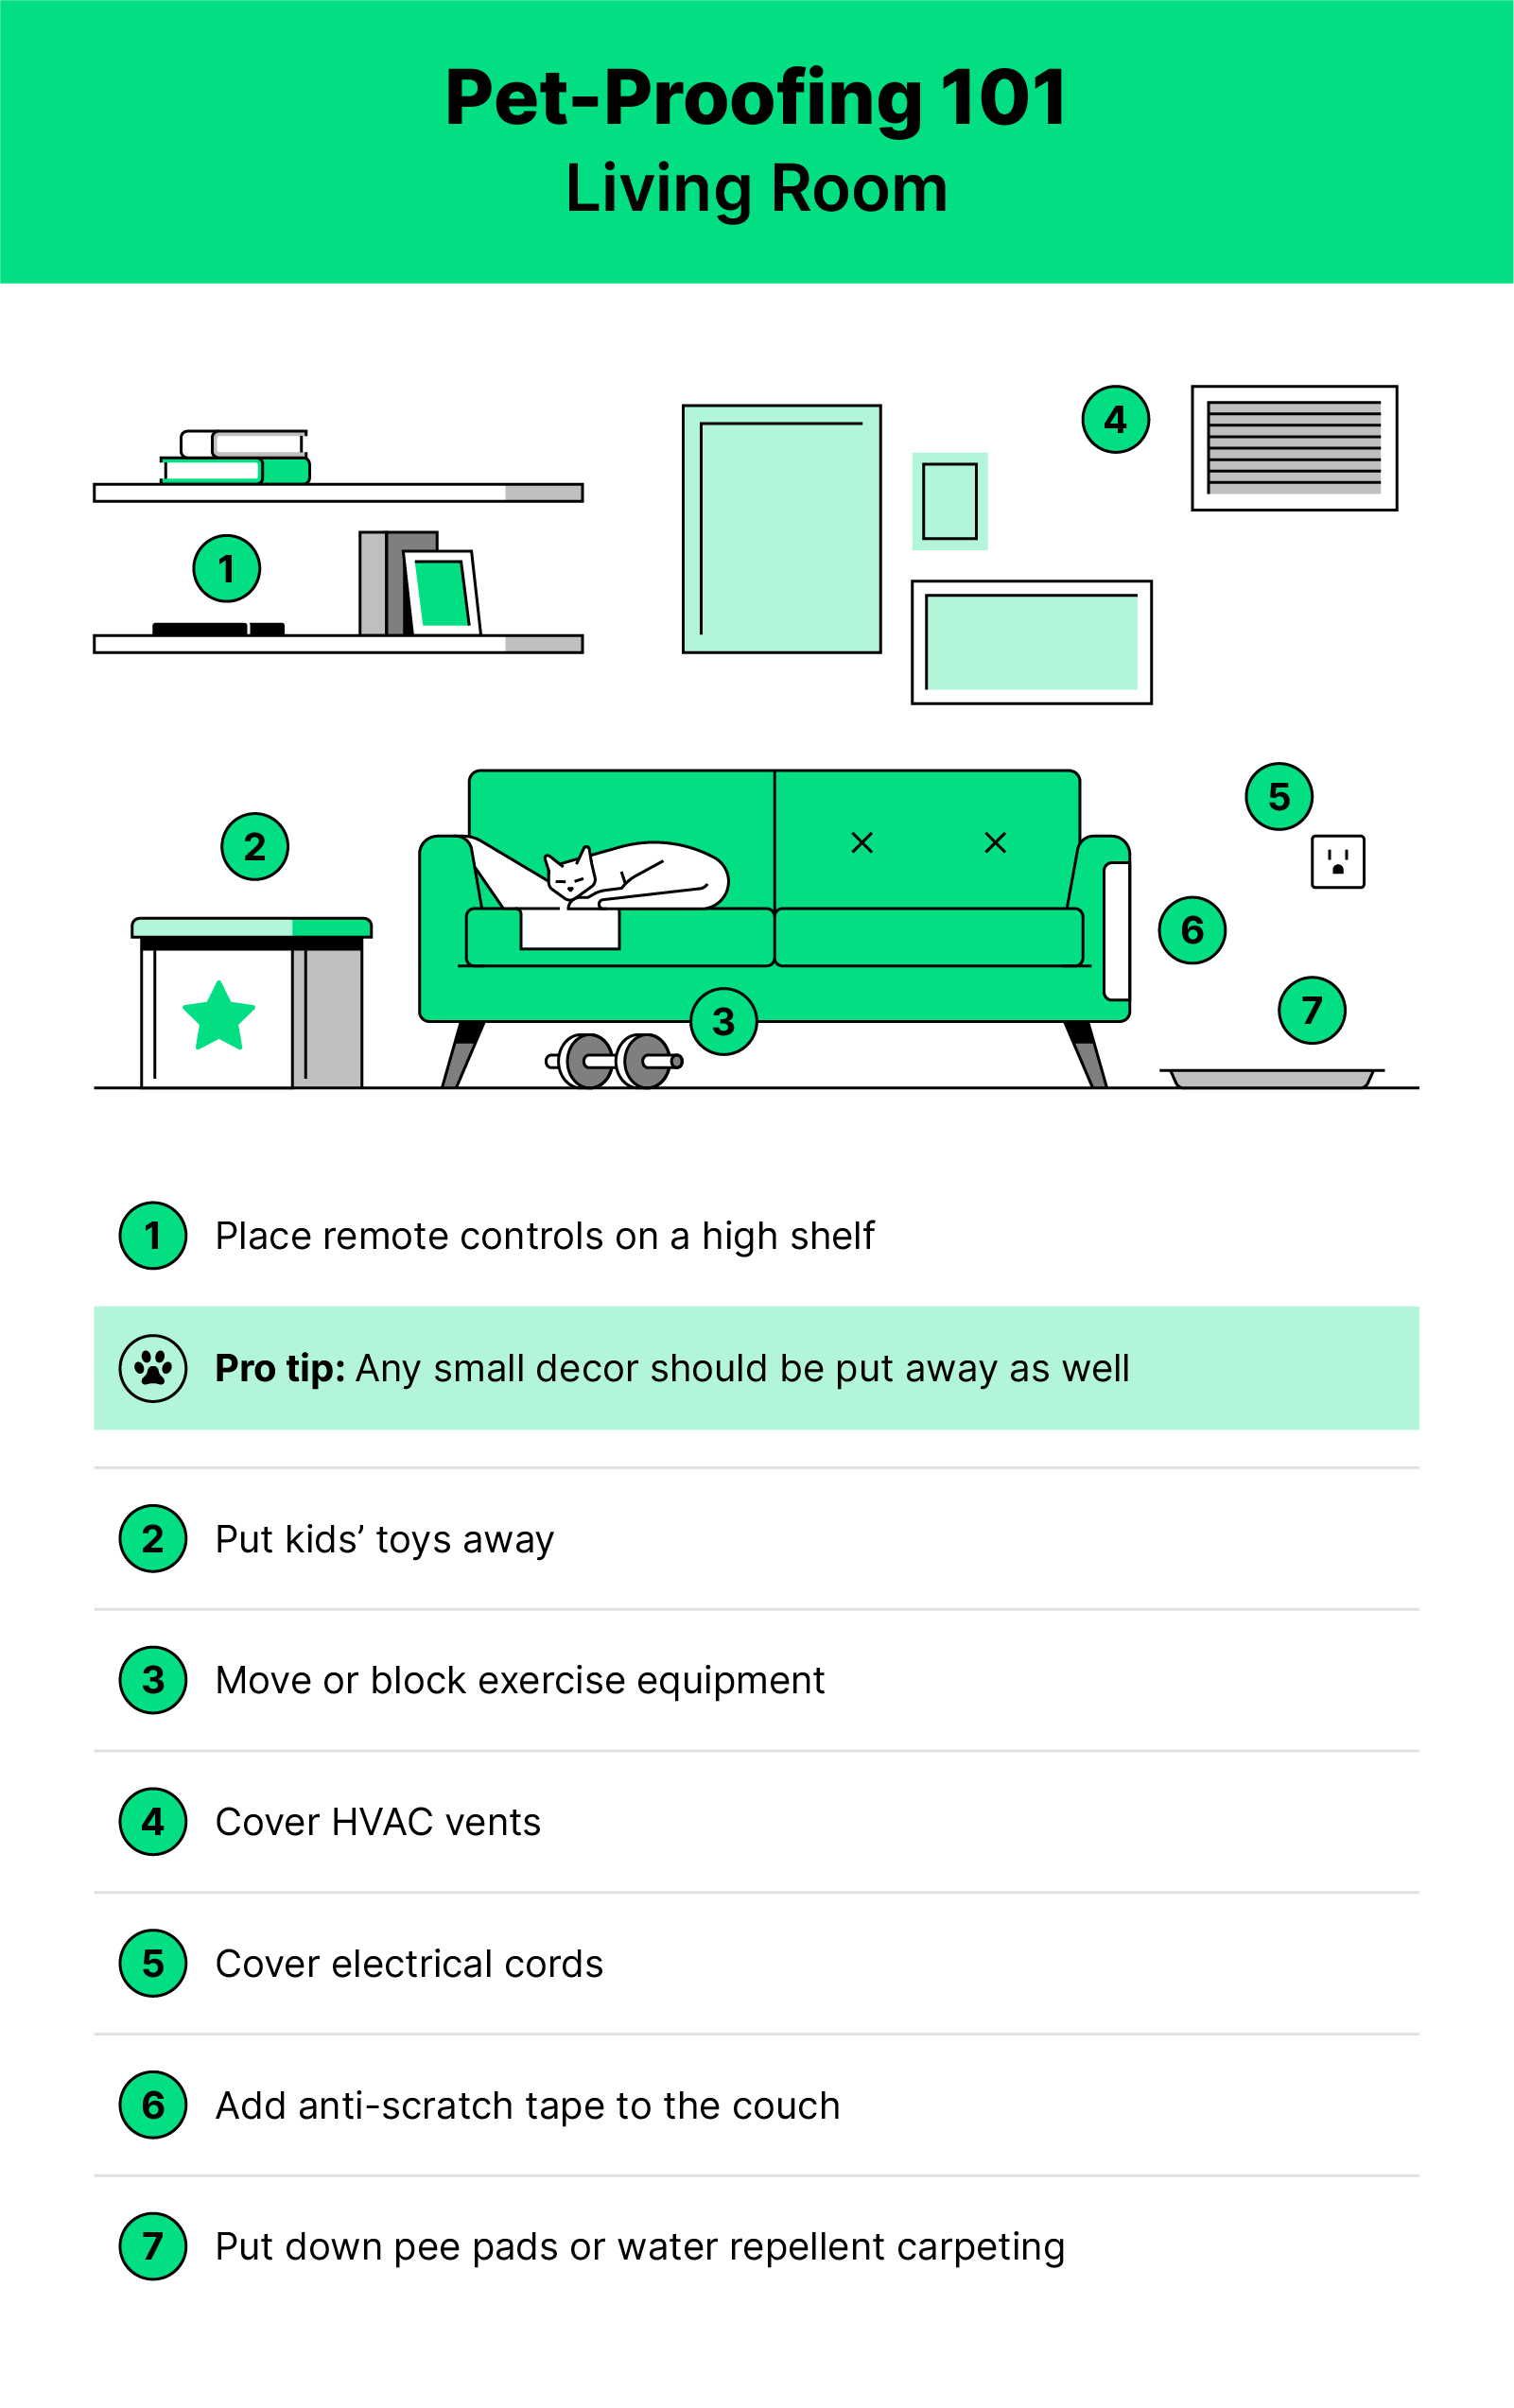 Green white and black illustration of a living room with a cat and pet proofing tips